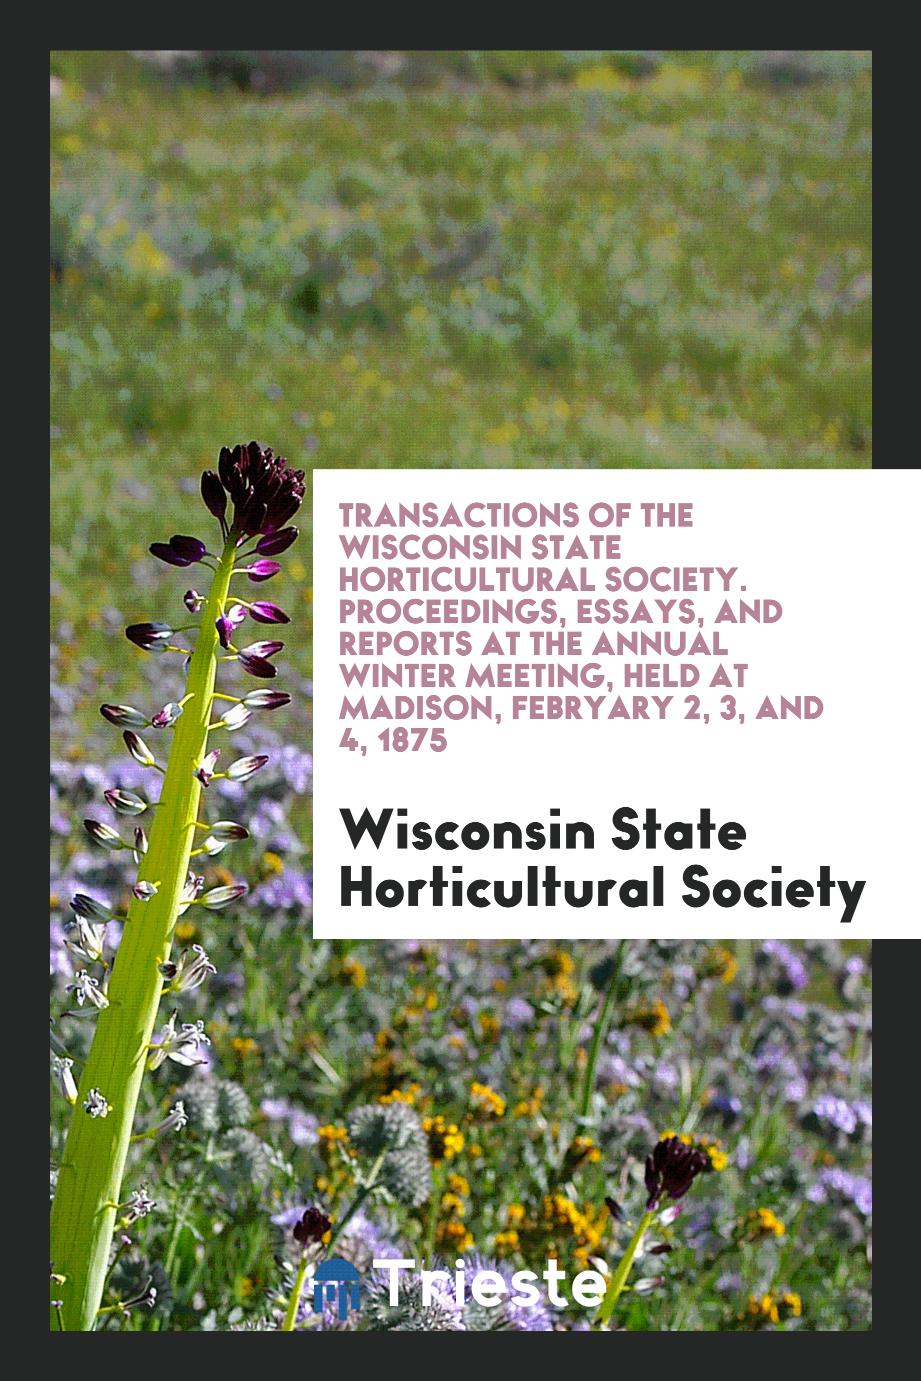 Transactions of the Wisconsin State Horticultural Society. Proceedings, Essays, and Reports at the Annual Winter Meeting, Held at Madison, Febryary 2, 3, and 4, 1875